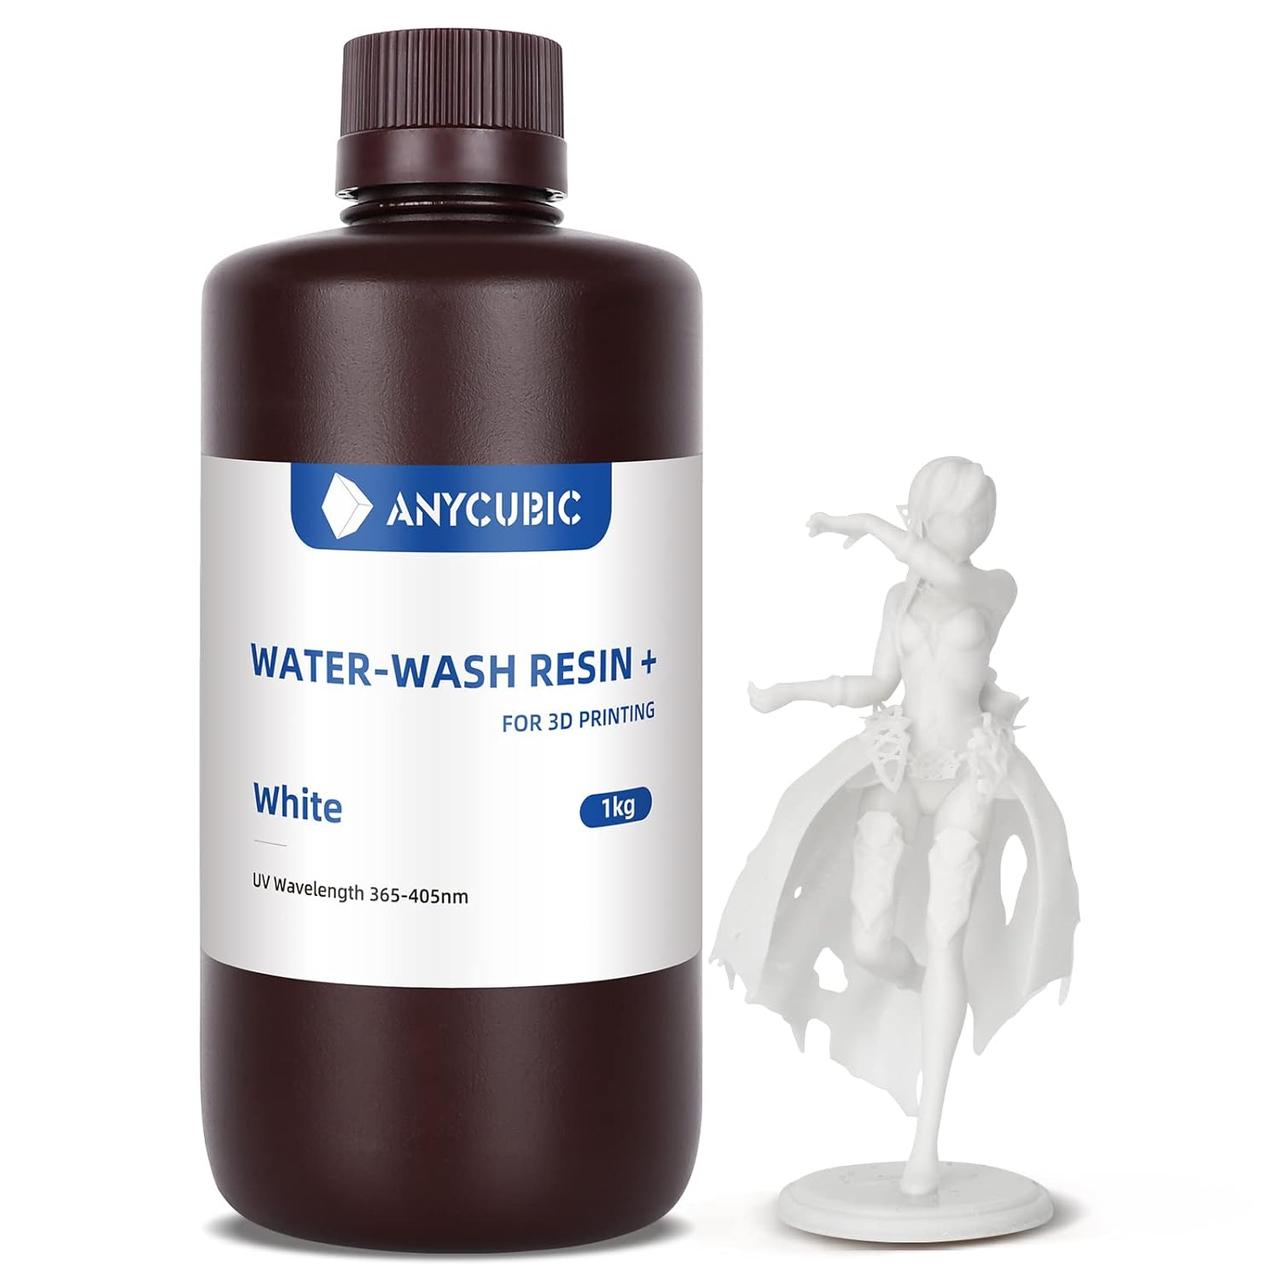 Anycubic Water-Wash Resin + White 1 Kg Водосмываемая смола - фото 1 - id-p116379958